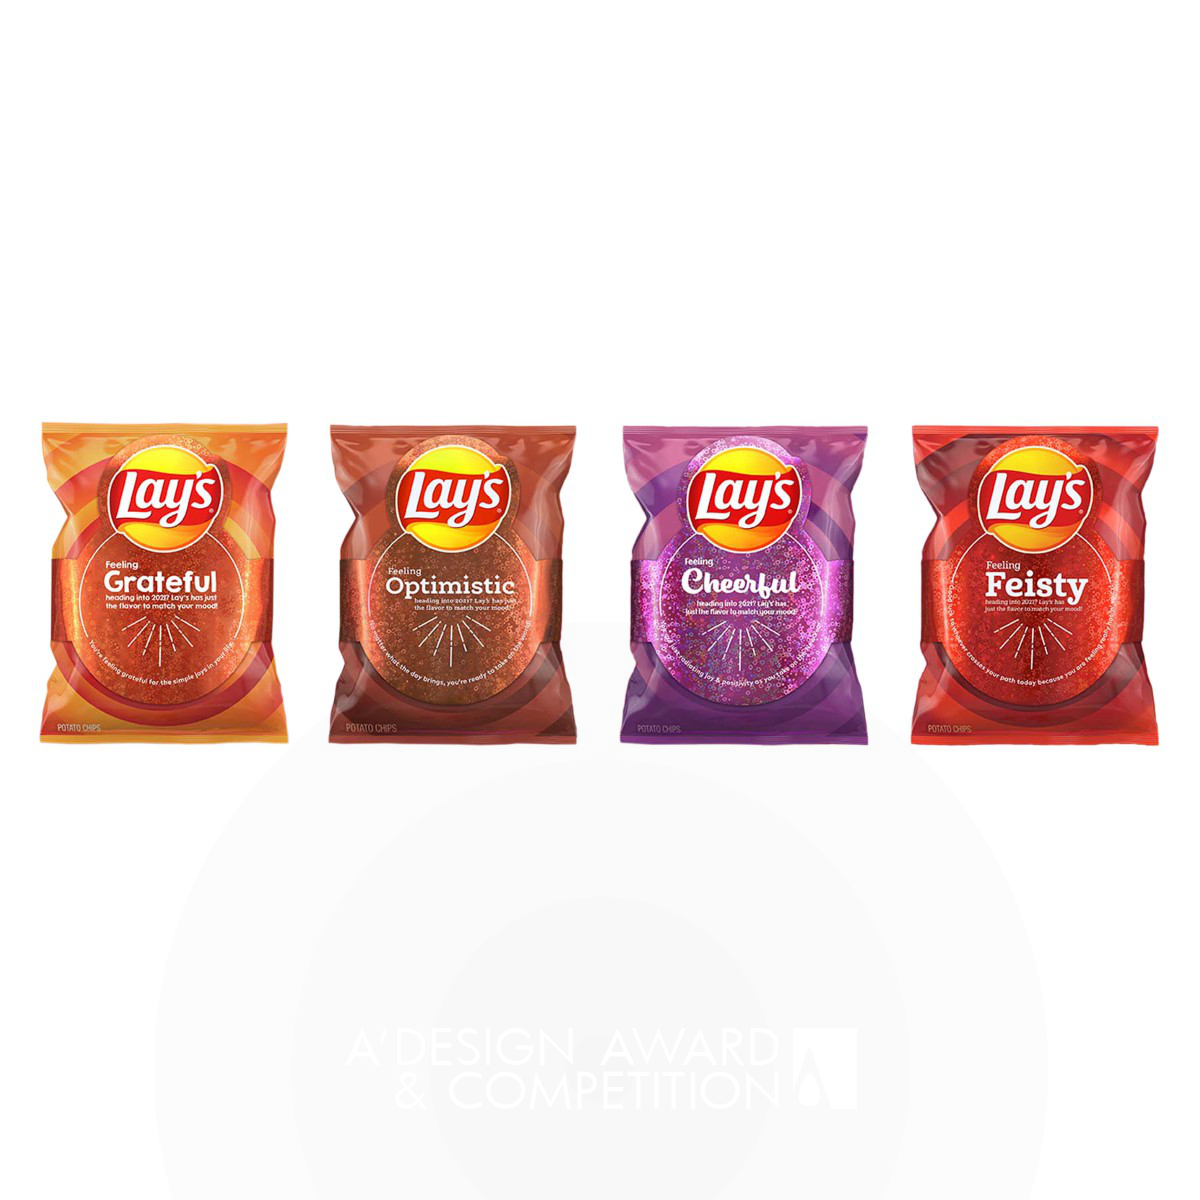 Lay's 2021 Mood Match Limited-Edition Packaging